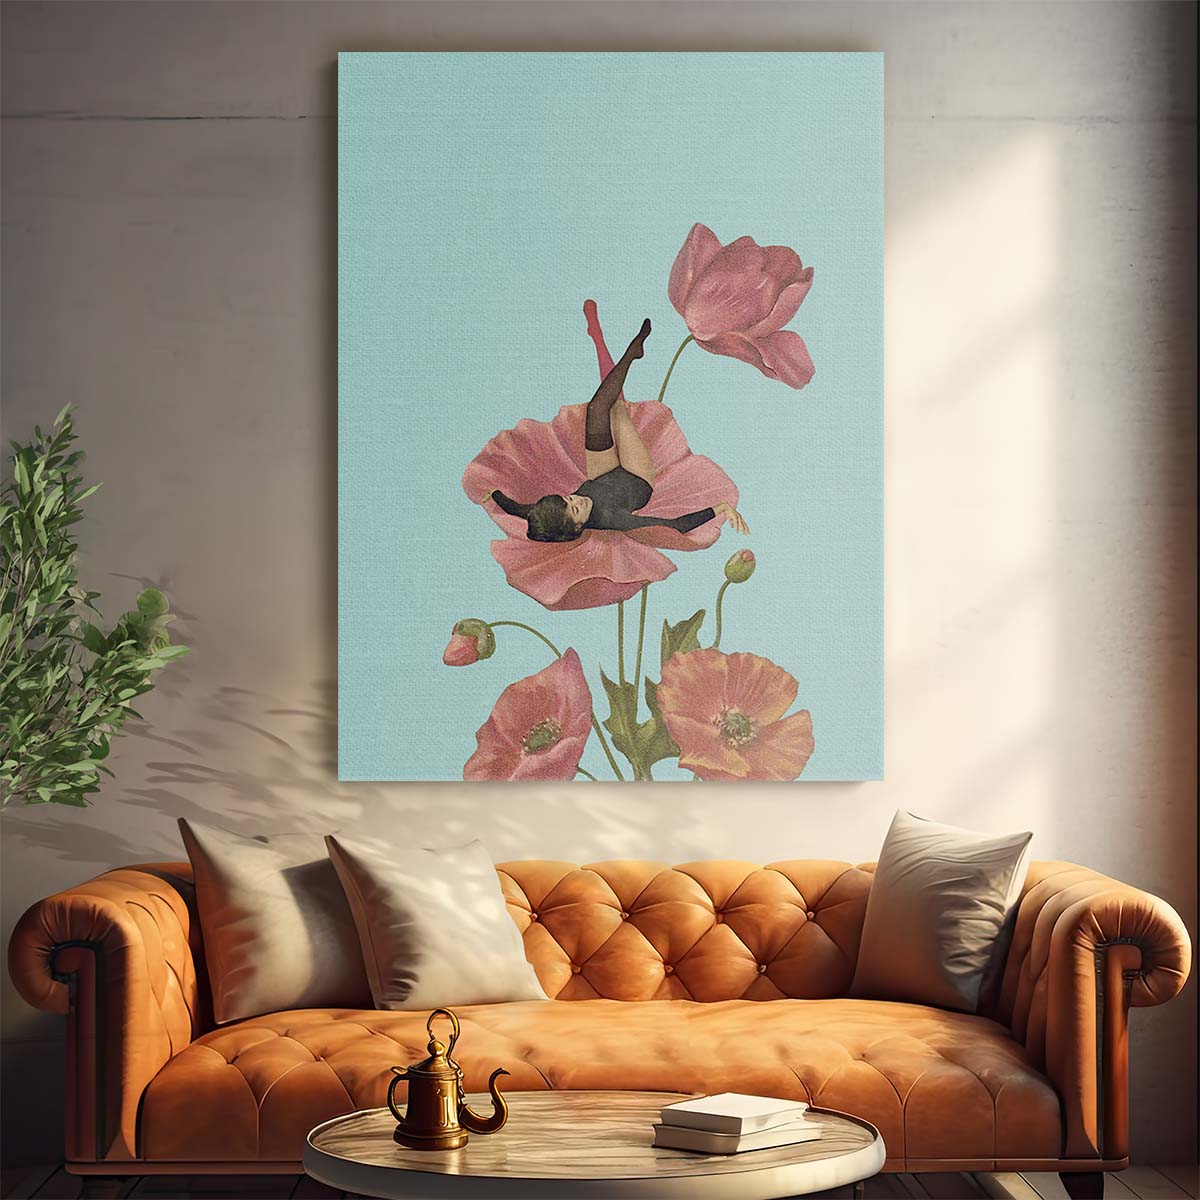 Mid-Century Floral Illustration Art, 'Colourful Dreamer' by Maarten Leon by Luxuriance Designs, made in USA